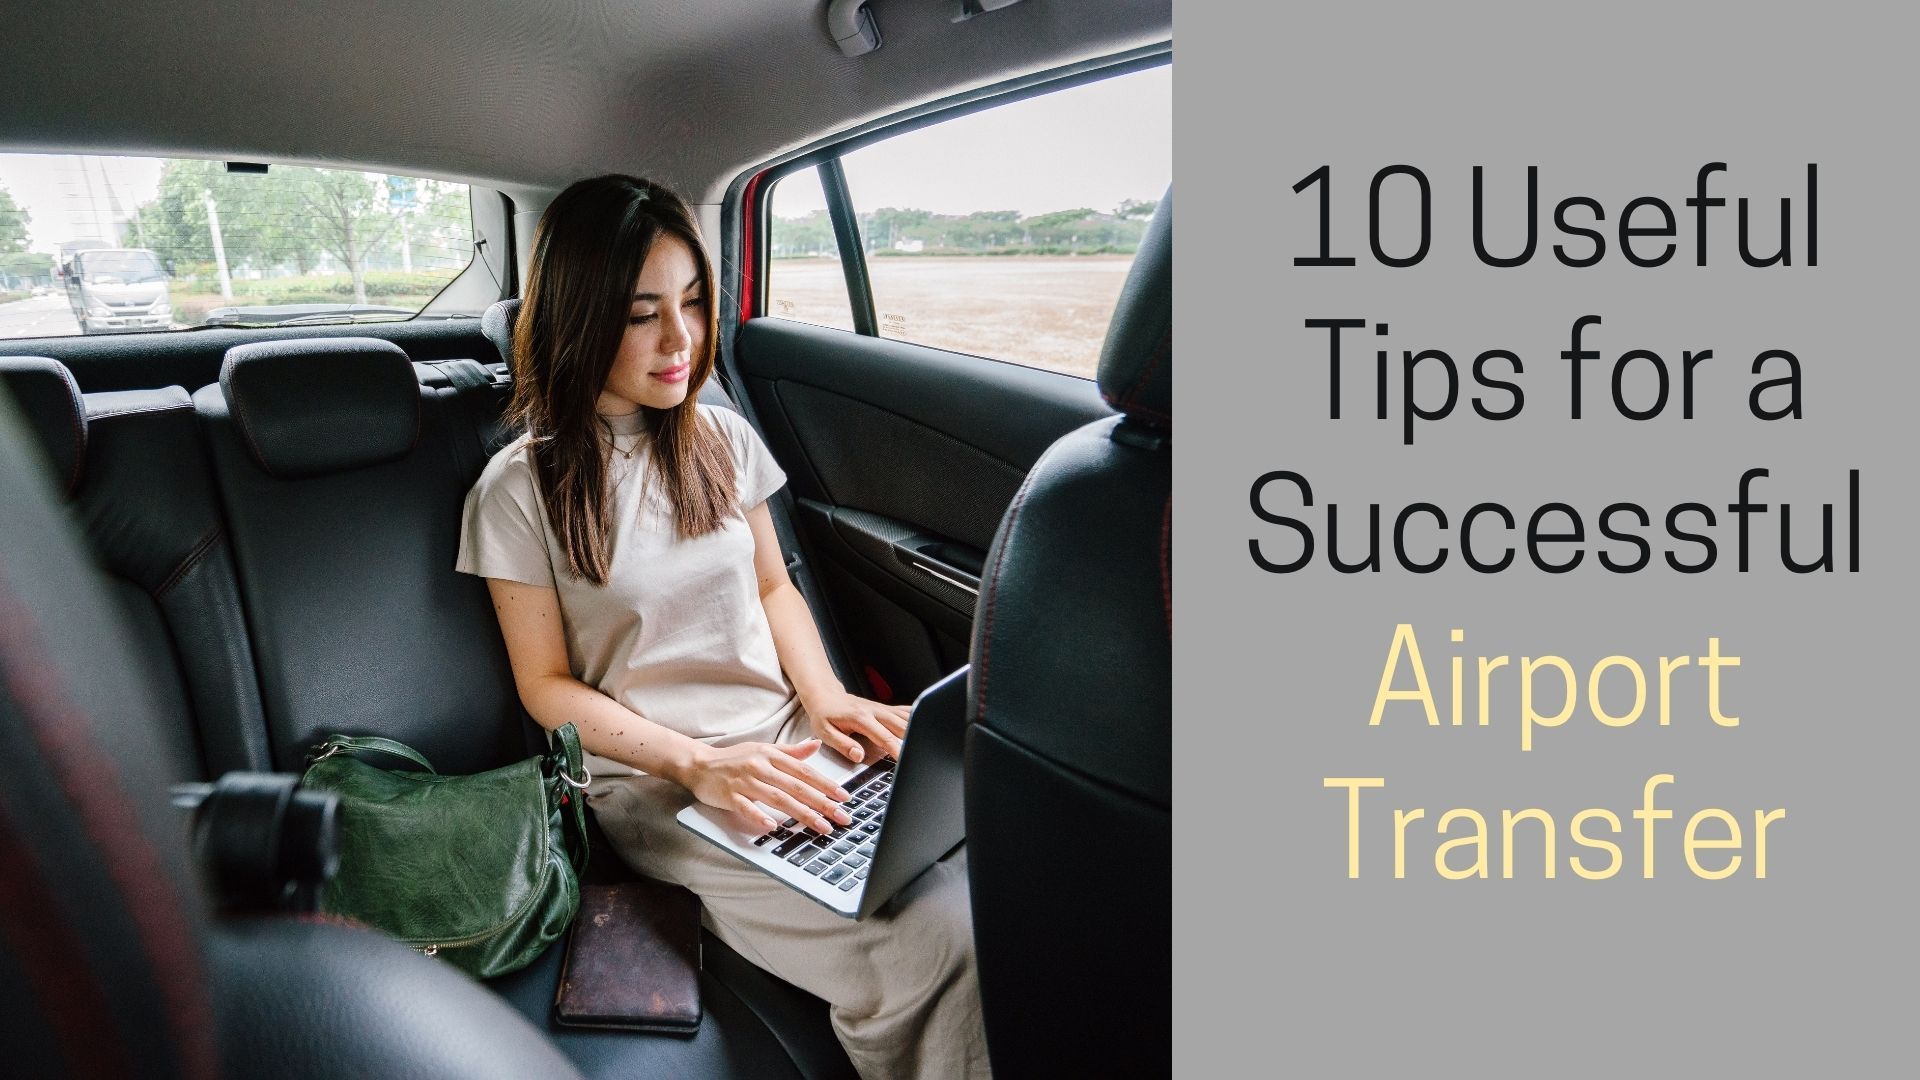 10 Useful Tips for a Successful Airport Transfer